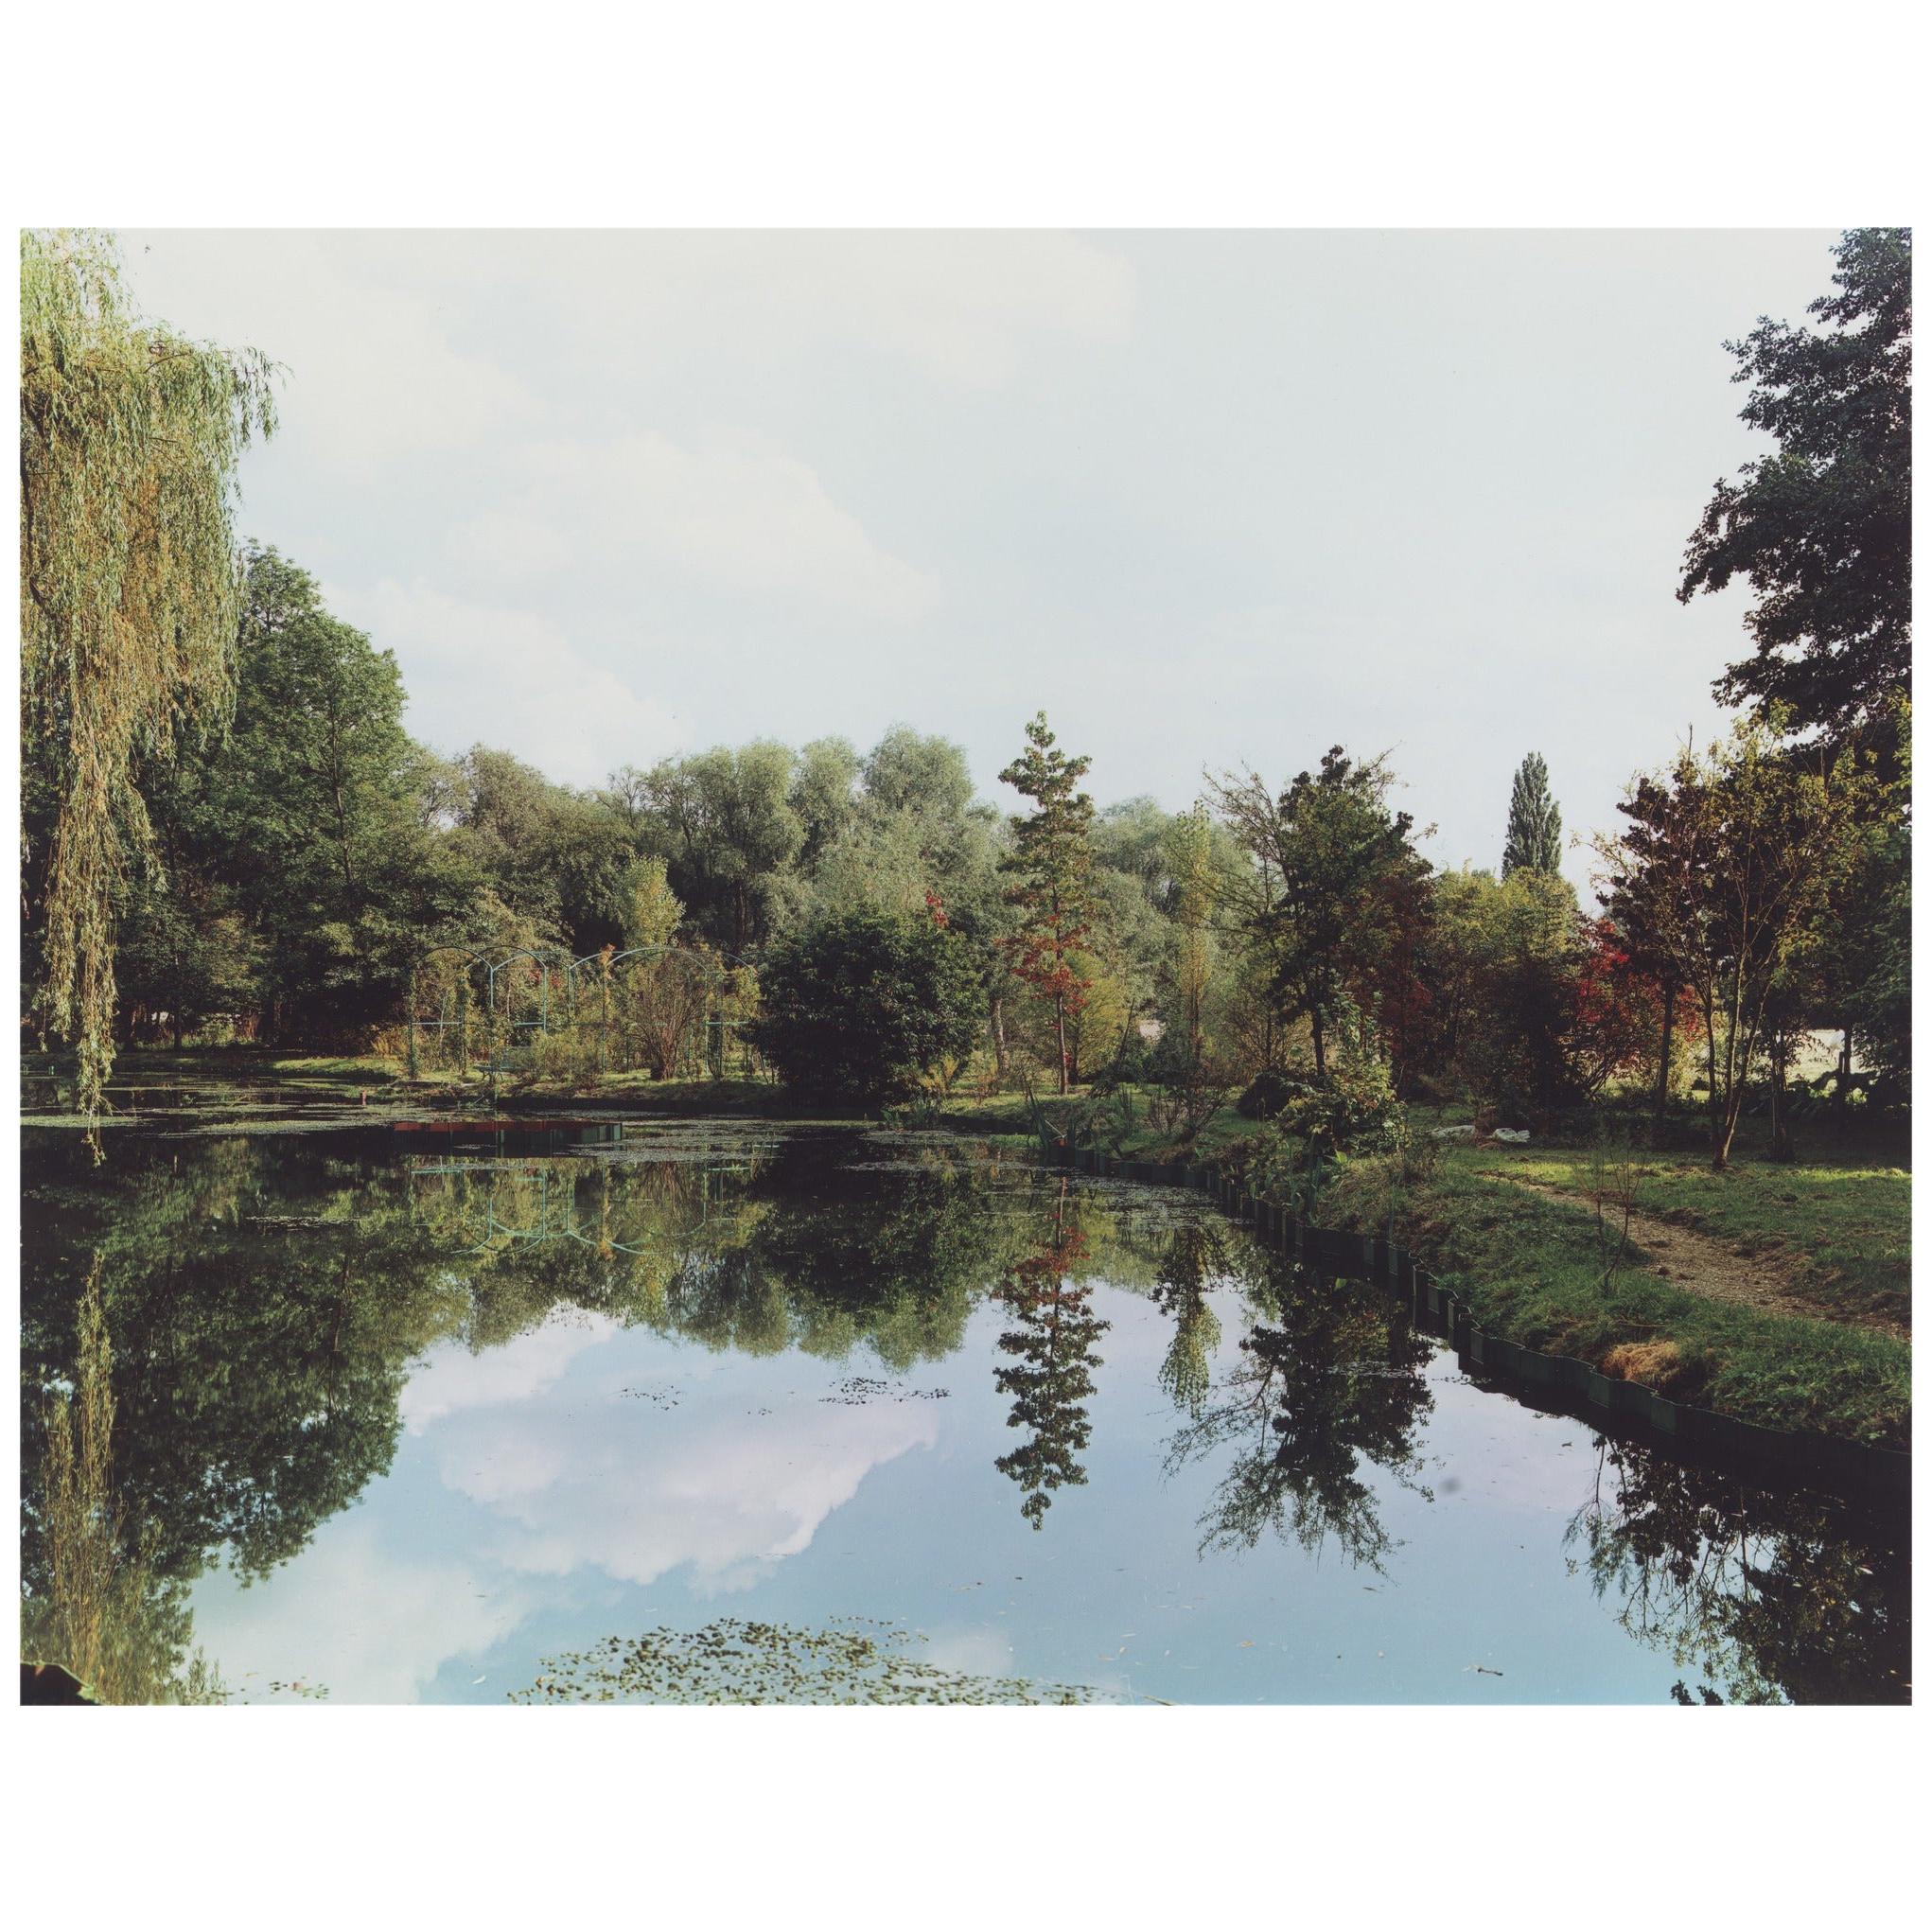 Color Landscape Photograph, Pond View 2, Gardens at Giverny, 1982, Stephen Shore